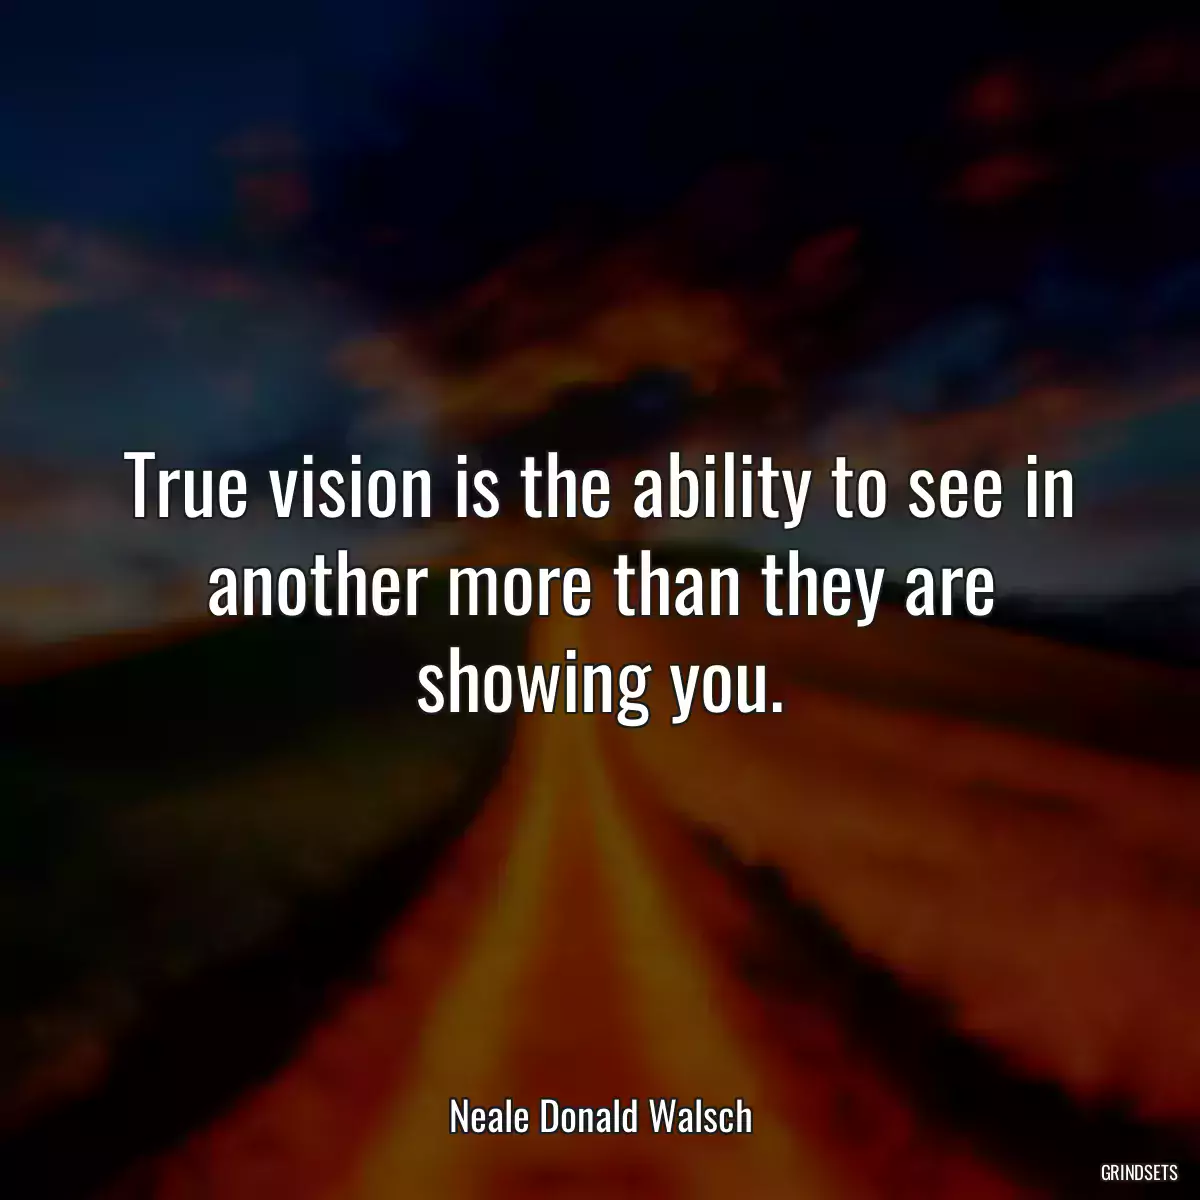 True vision is the ability to see in another more than they are showing you.